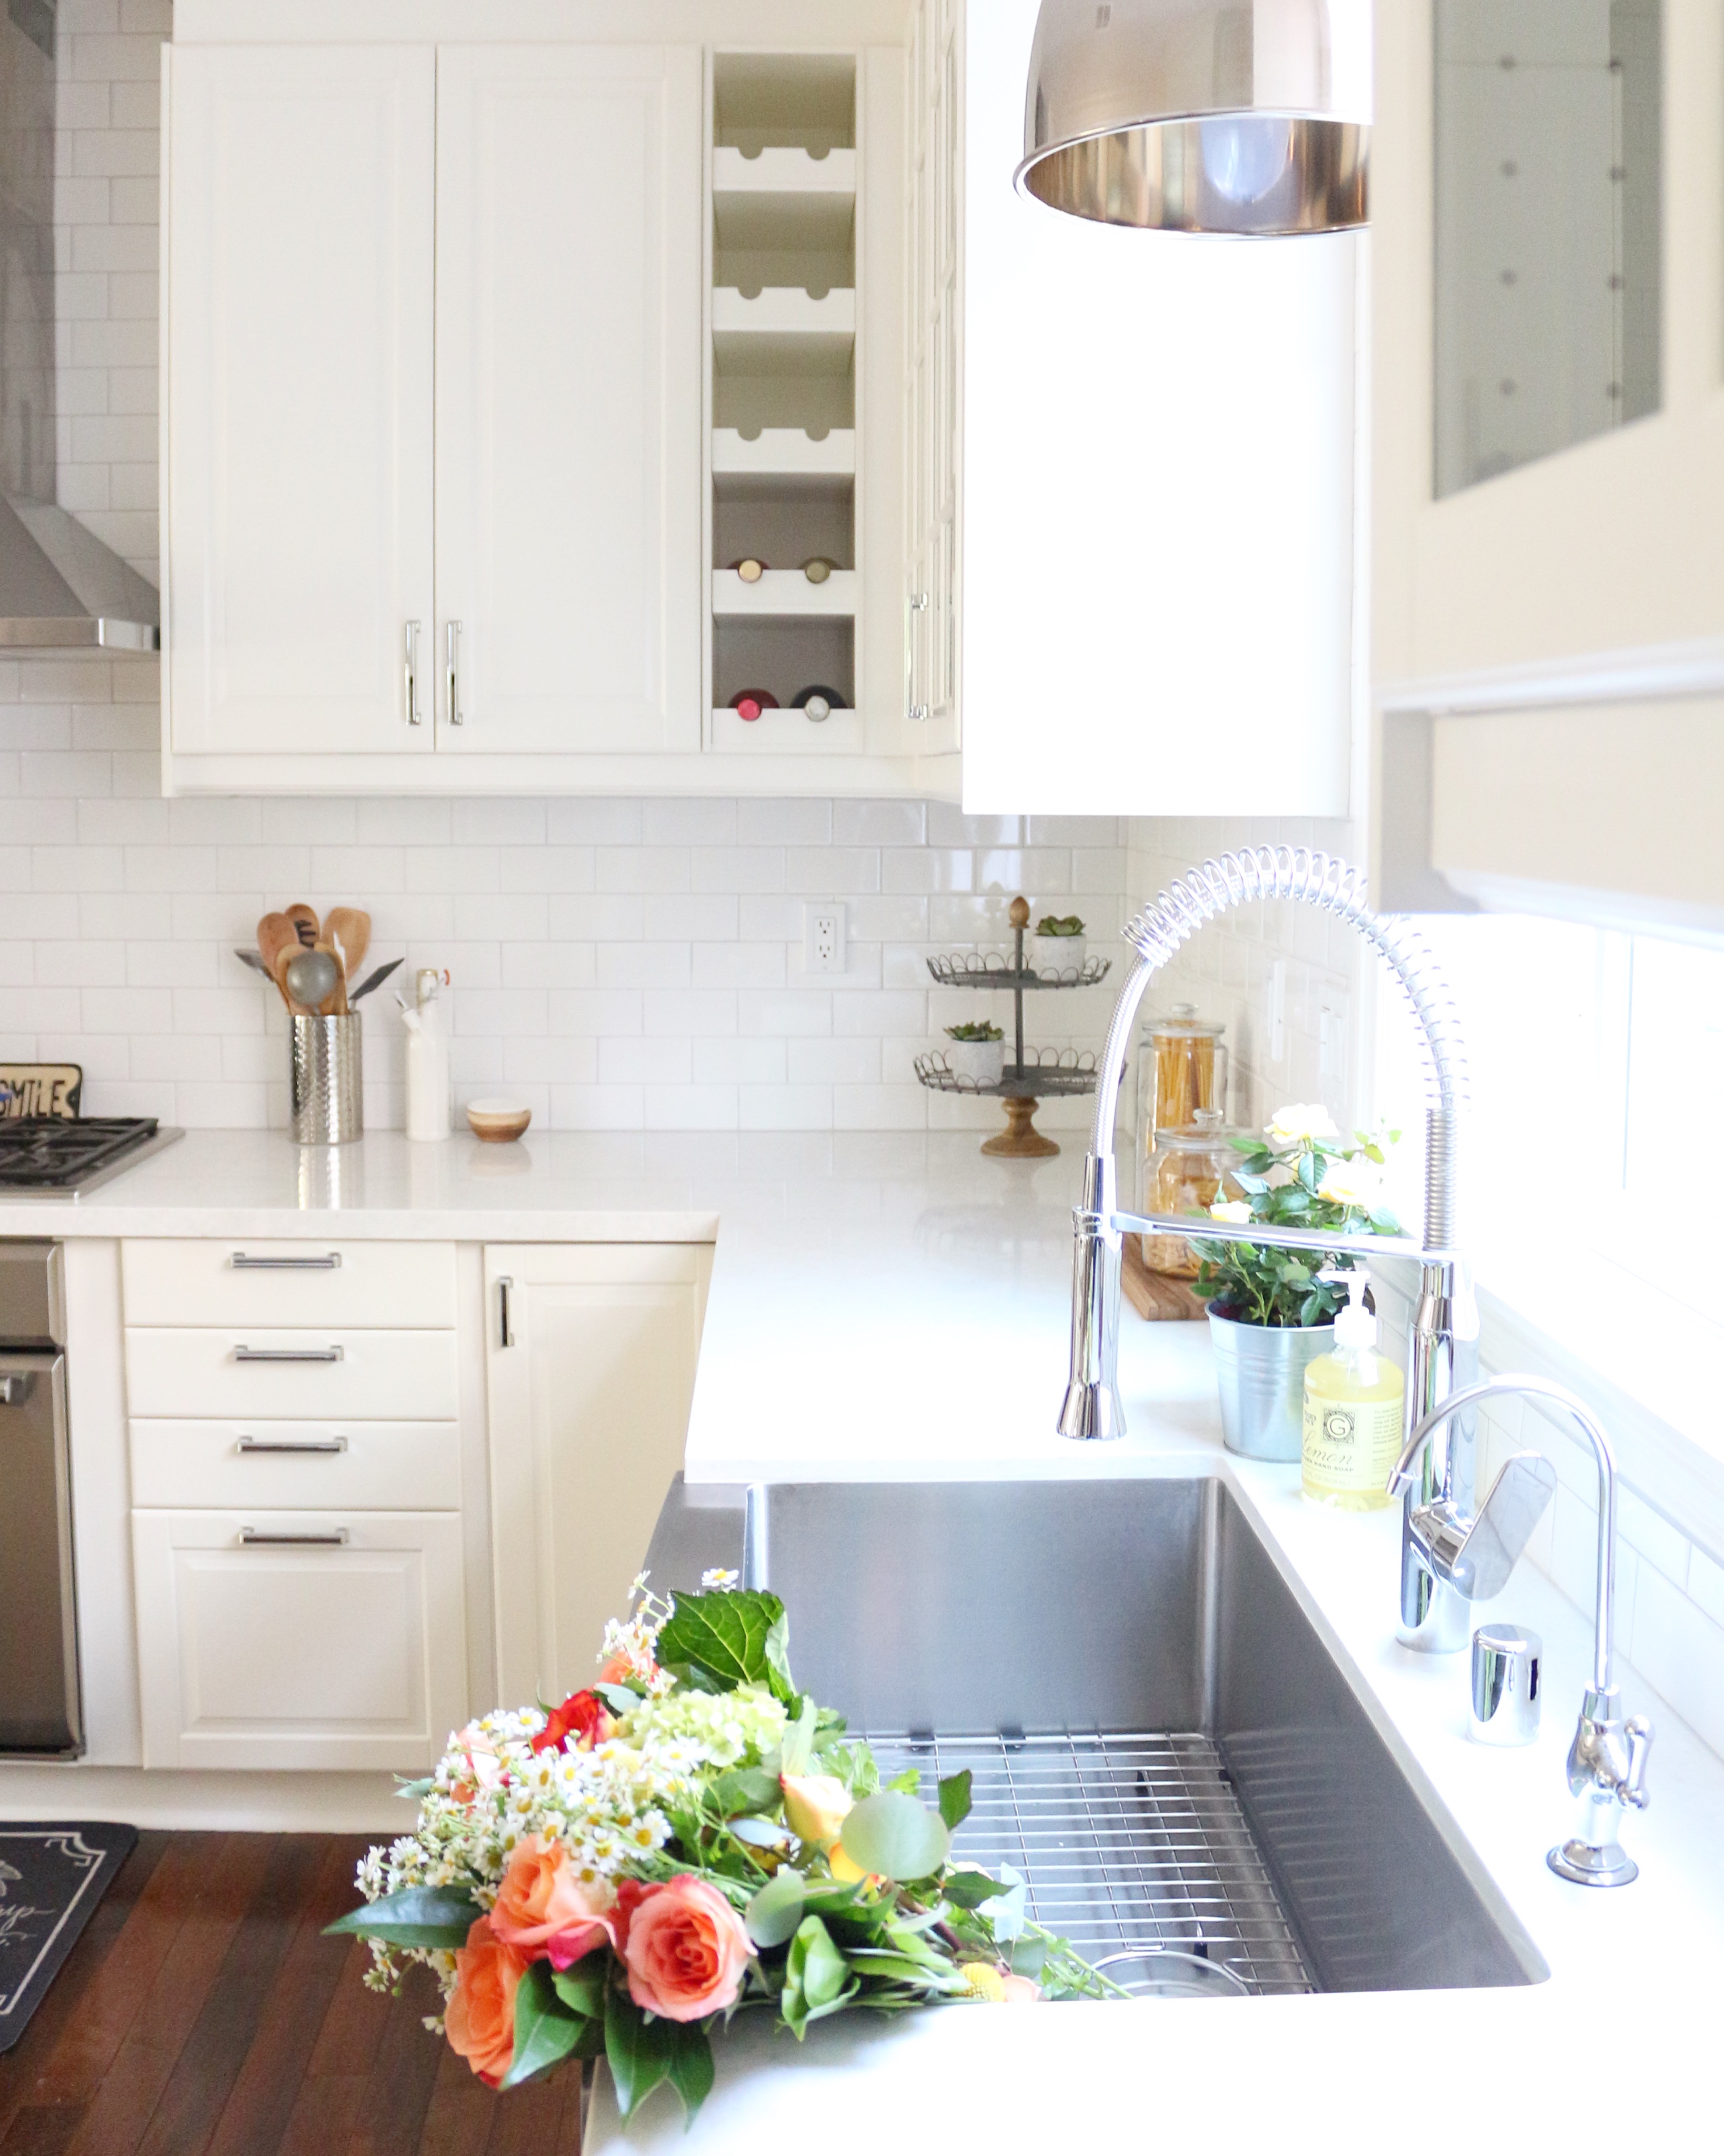 How To Customize Your Ikea Kitchen 10 Tips To Make It Look Custom